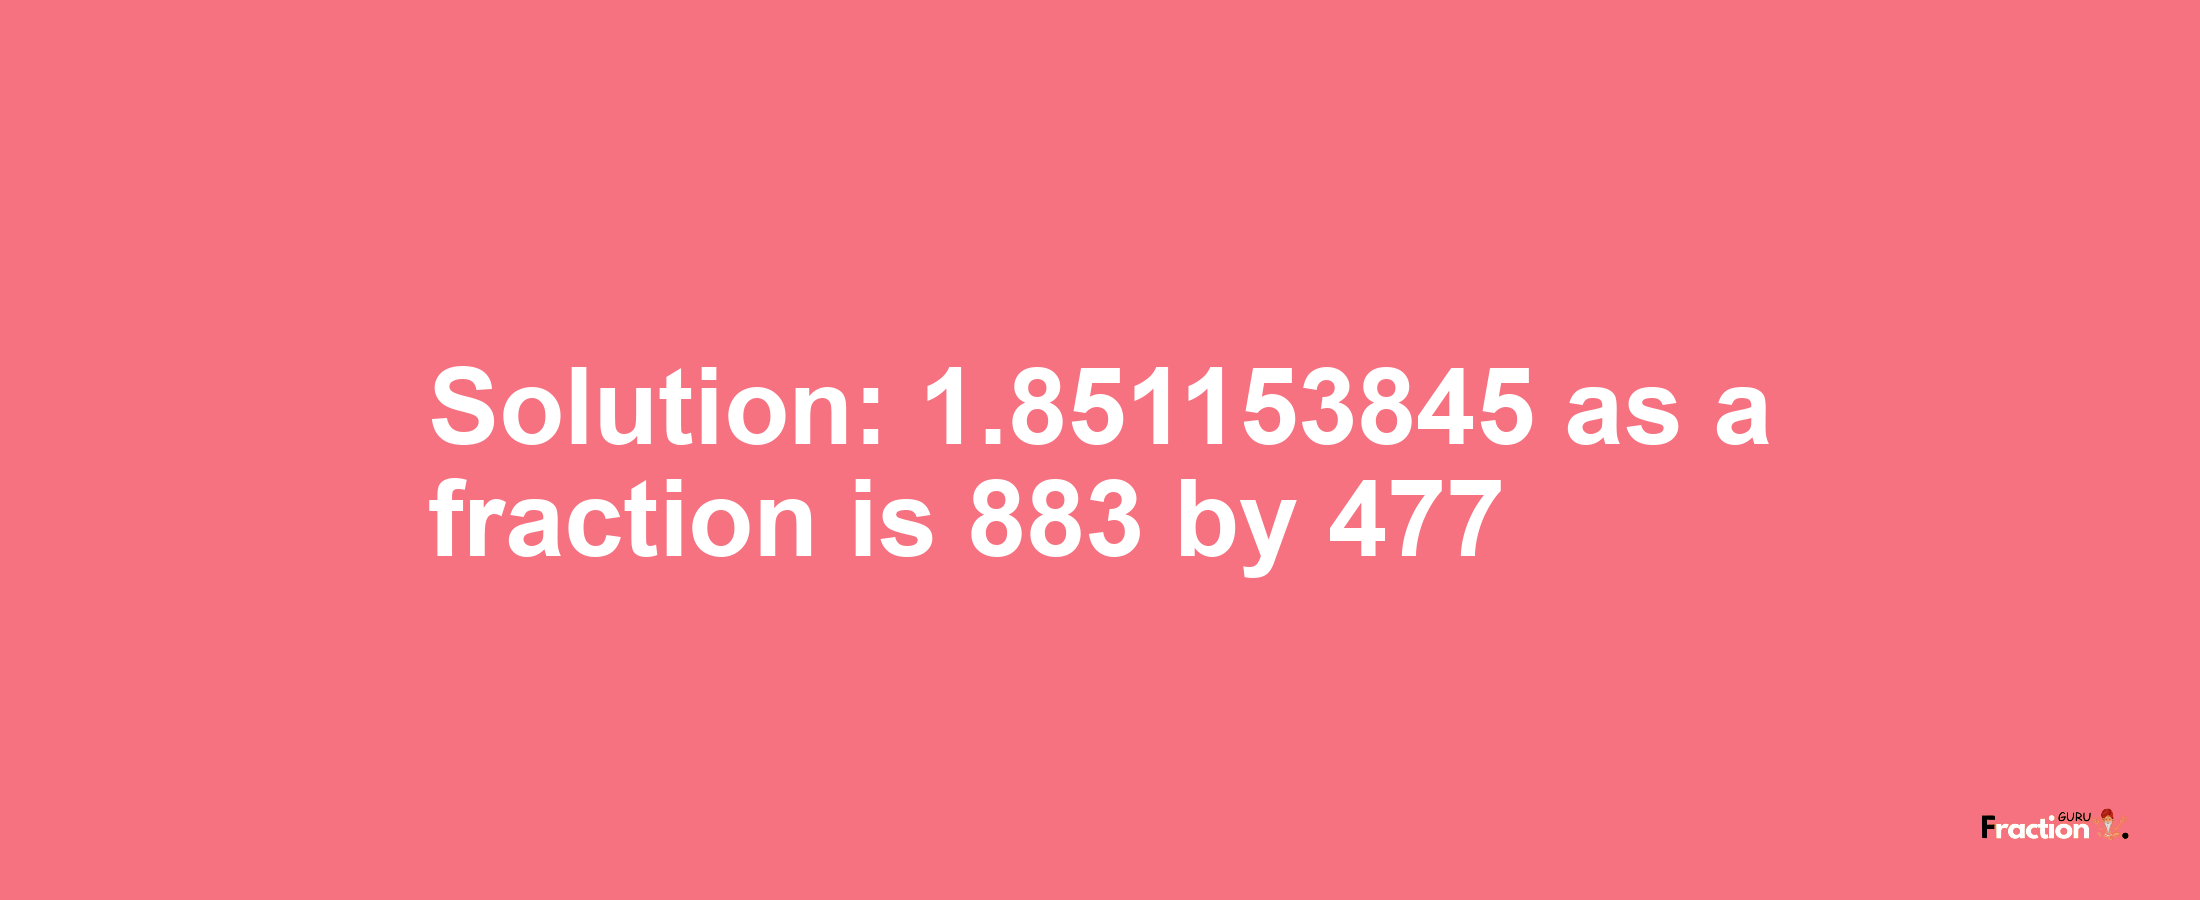 Solution:1.851153845 as a fraction is 883/477